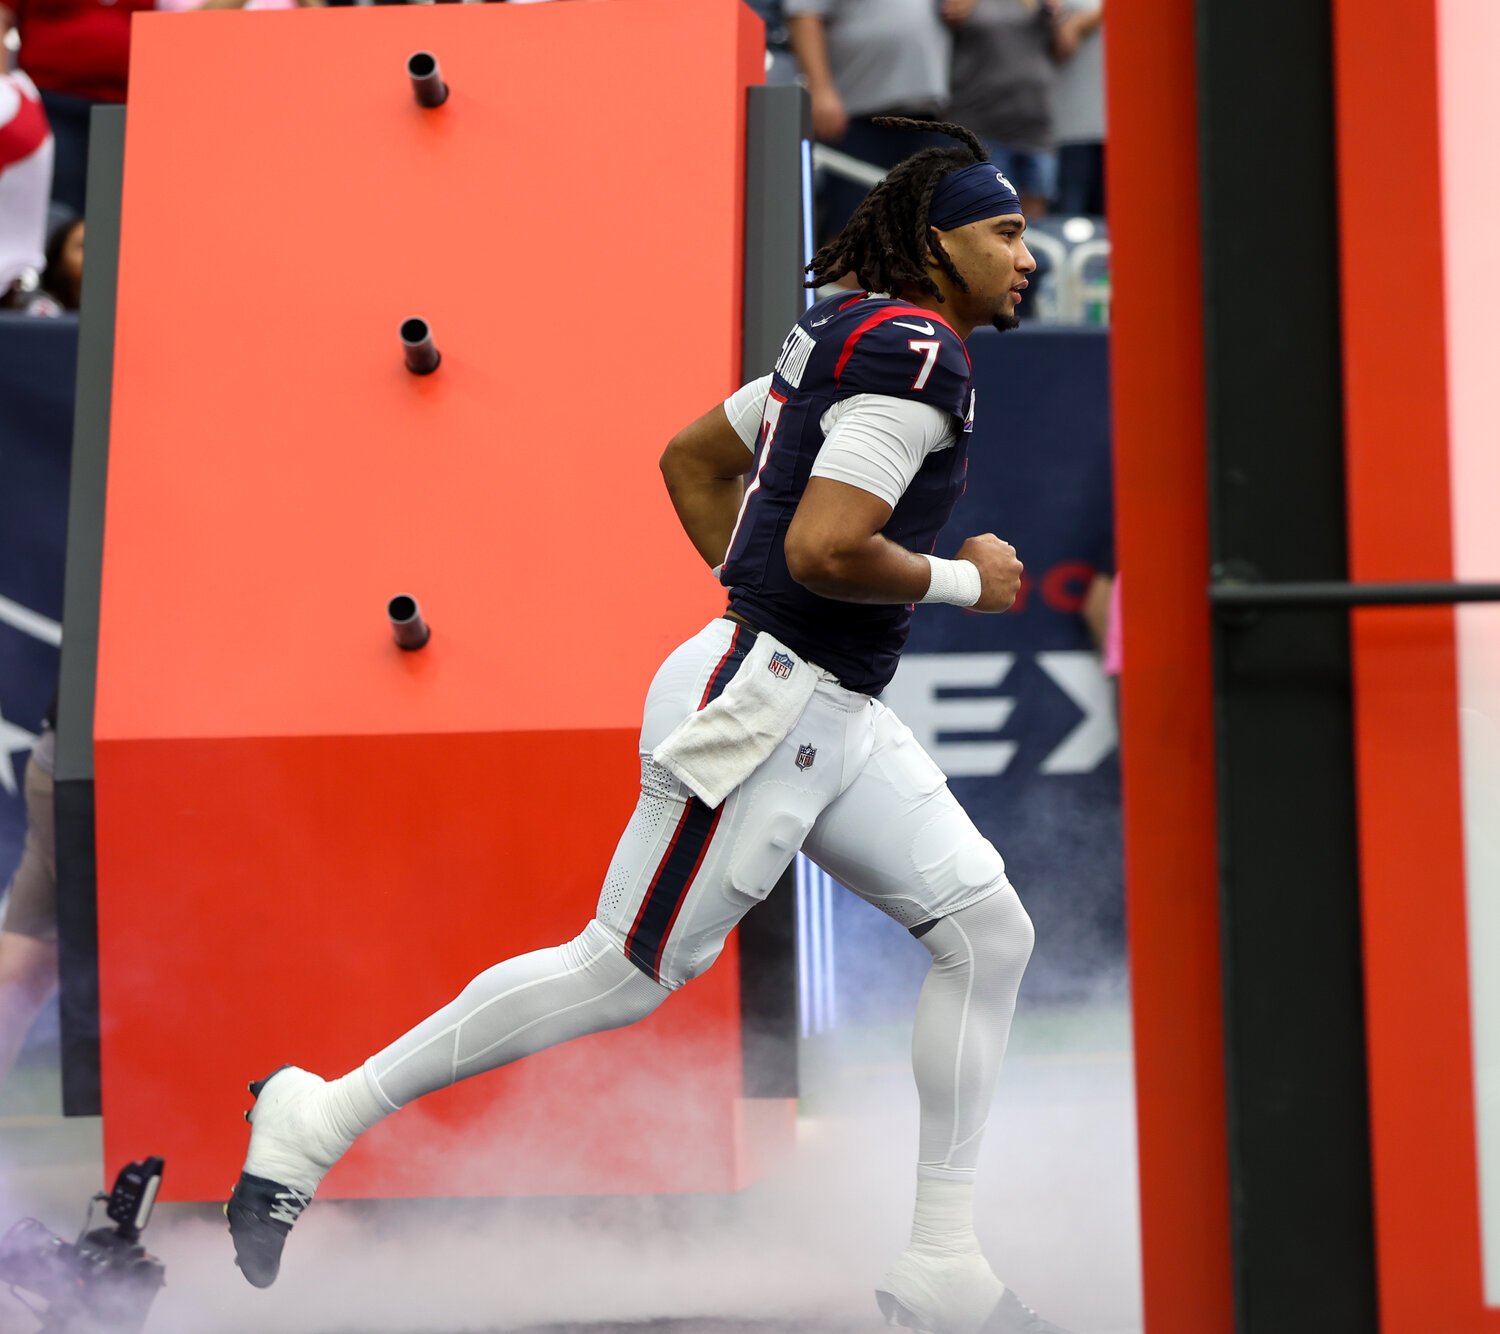 Texans quarterback C.J. Stroud (7) takes the field for an NFL game between the Texans and the Saints on October 15, 2023 in Houston. The Texans won, 20-13.